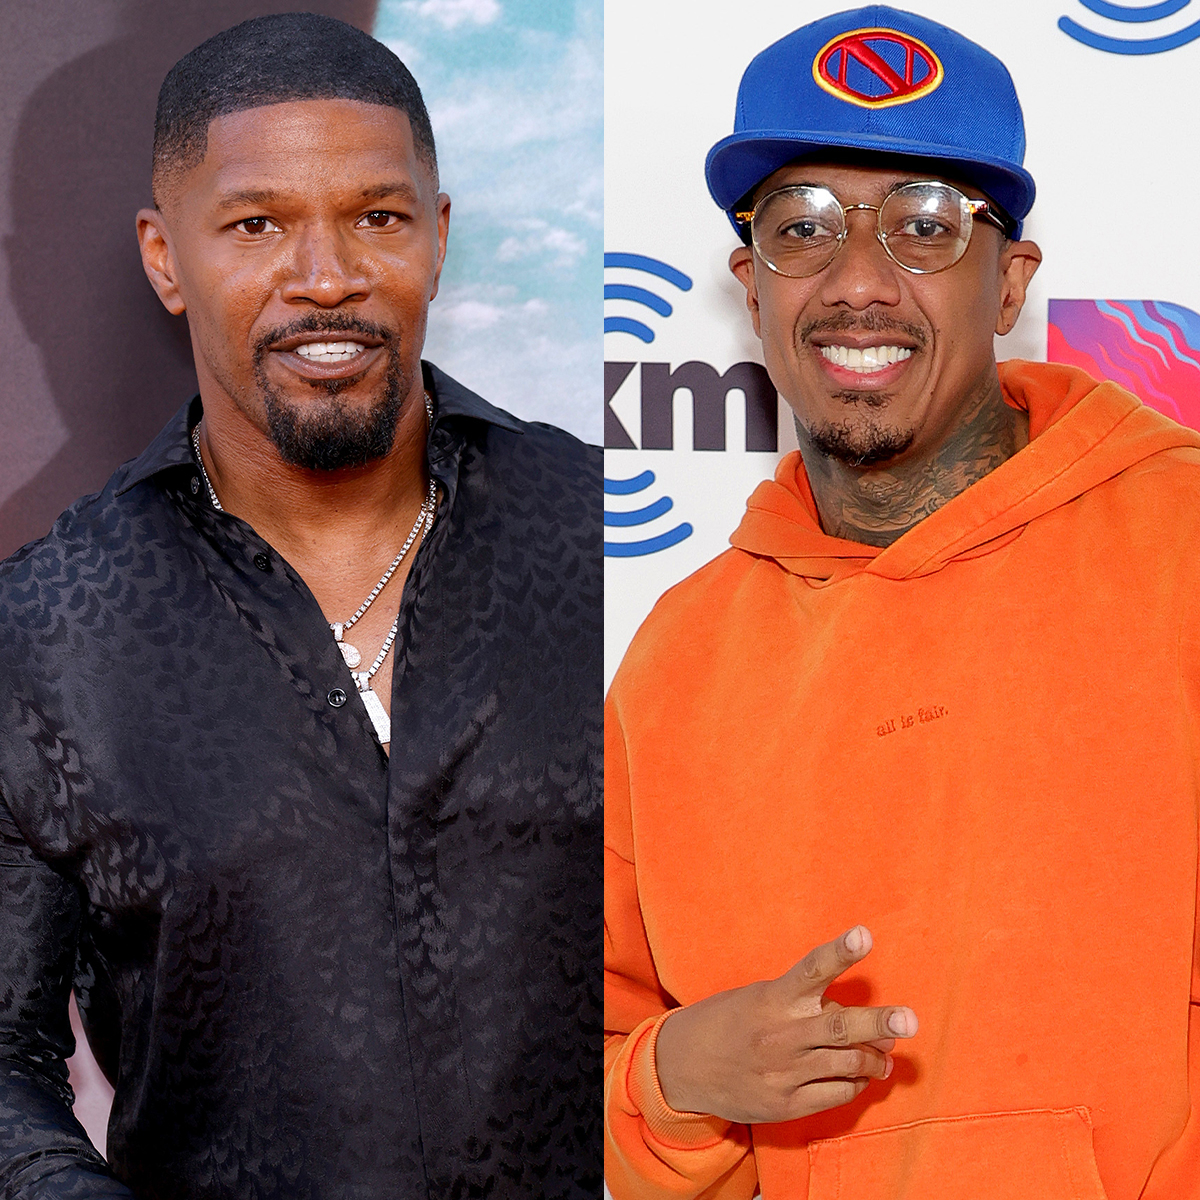 Nick Cannon Says He’s “Praying” For Jamie Foxx Amid Hospitalization